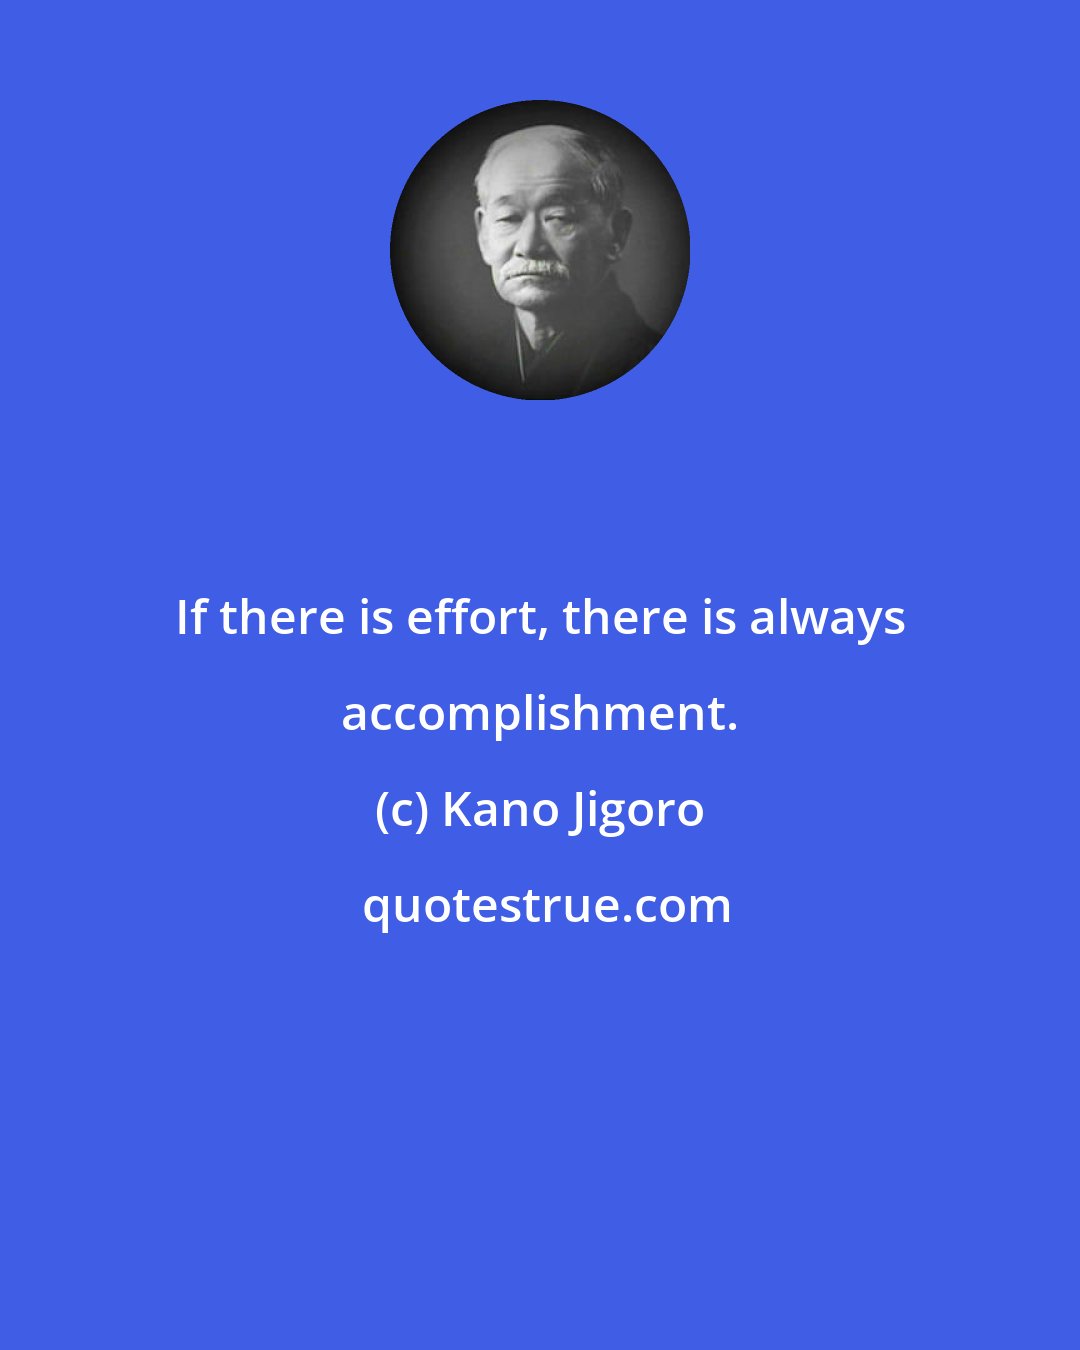 Kano Jigoro: If there is effort, there is always accomplishment.